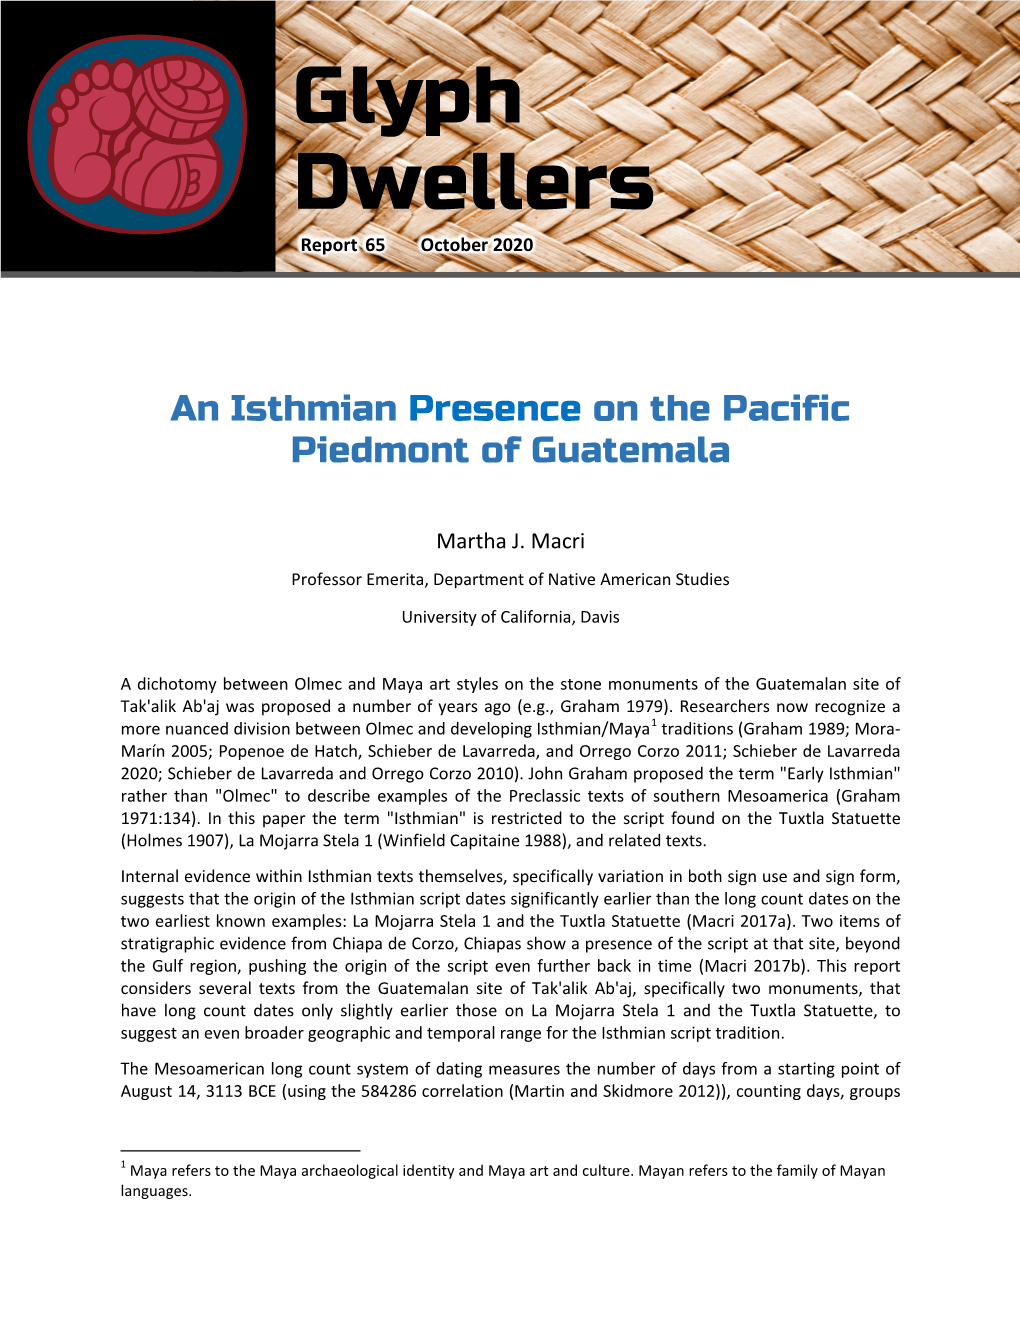 An Isthmian Presence on the Pacific Piedmont of Guatemala